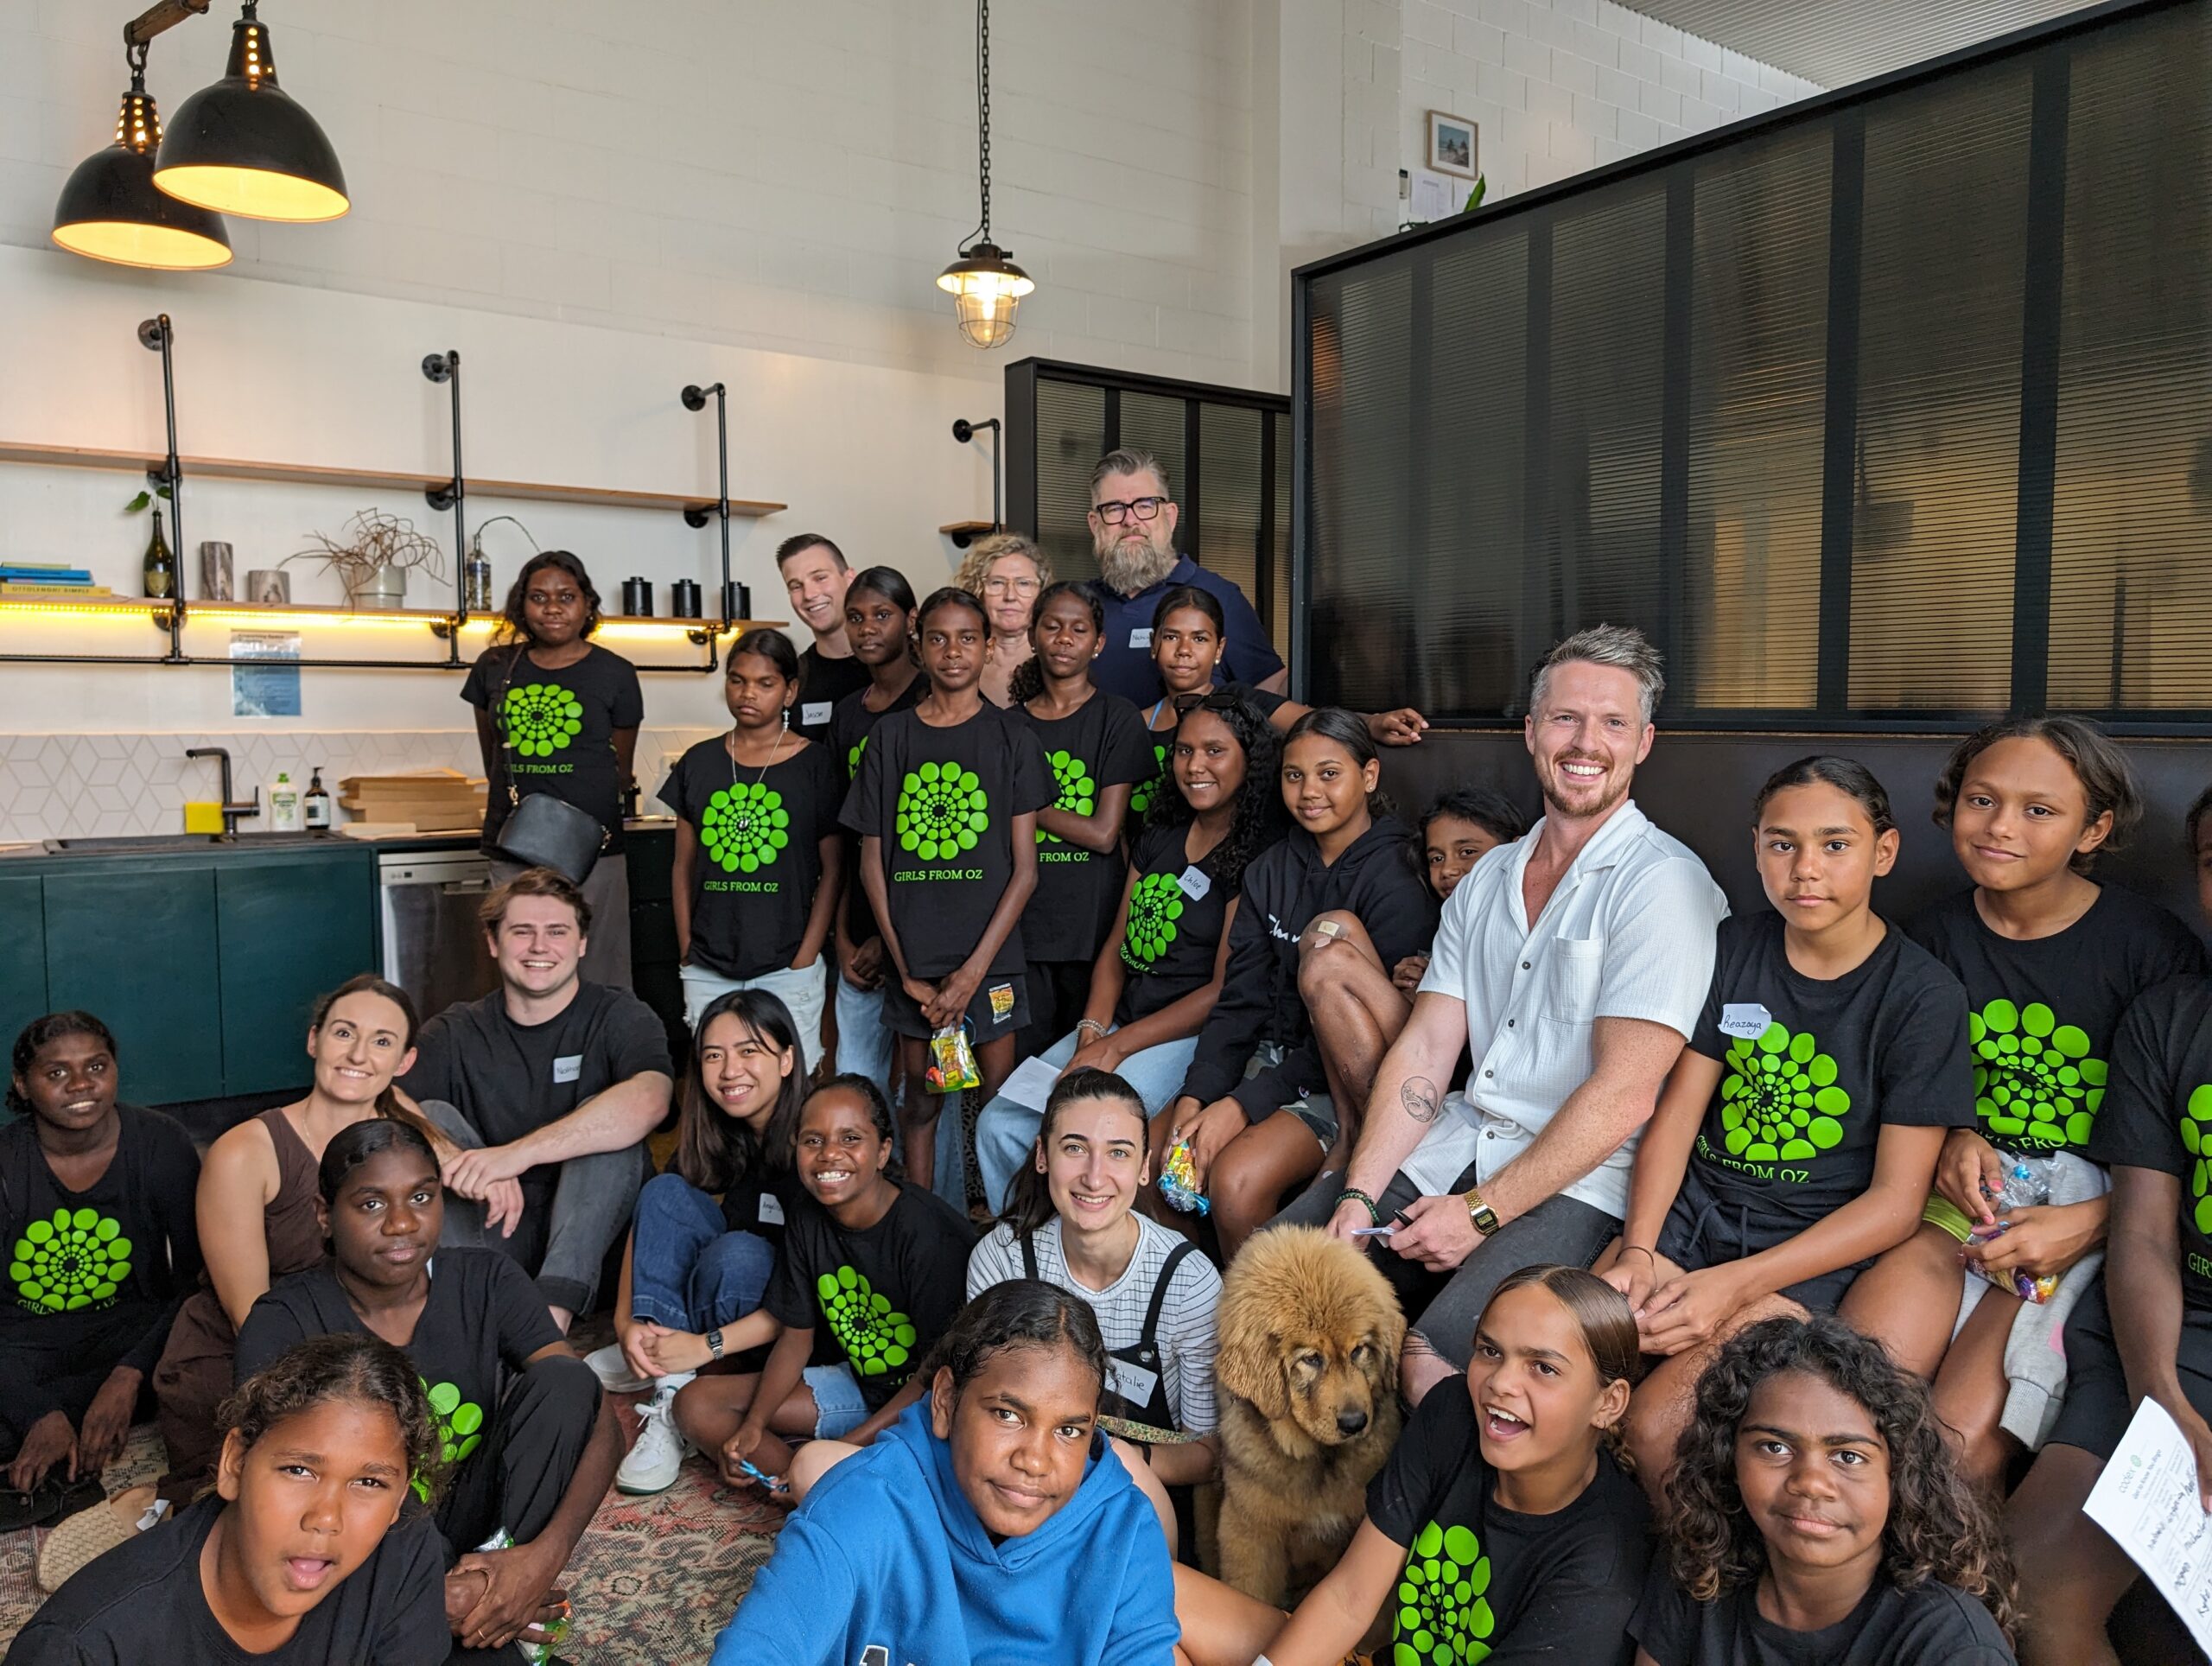 A large group photo with the Codex team and Girls from Oz girls and staff members.